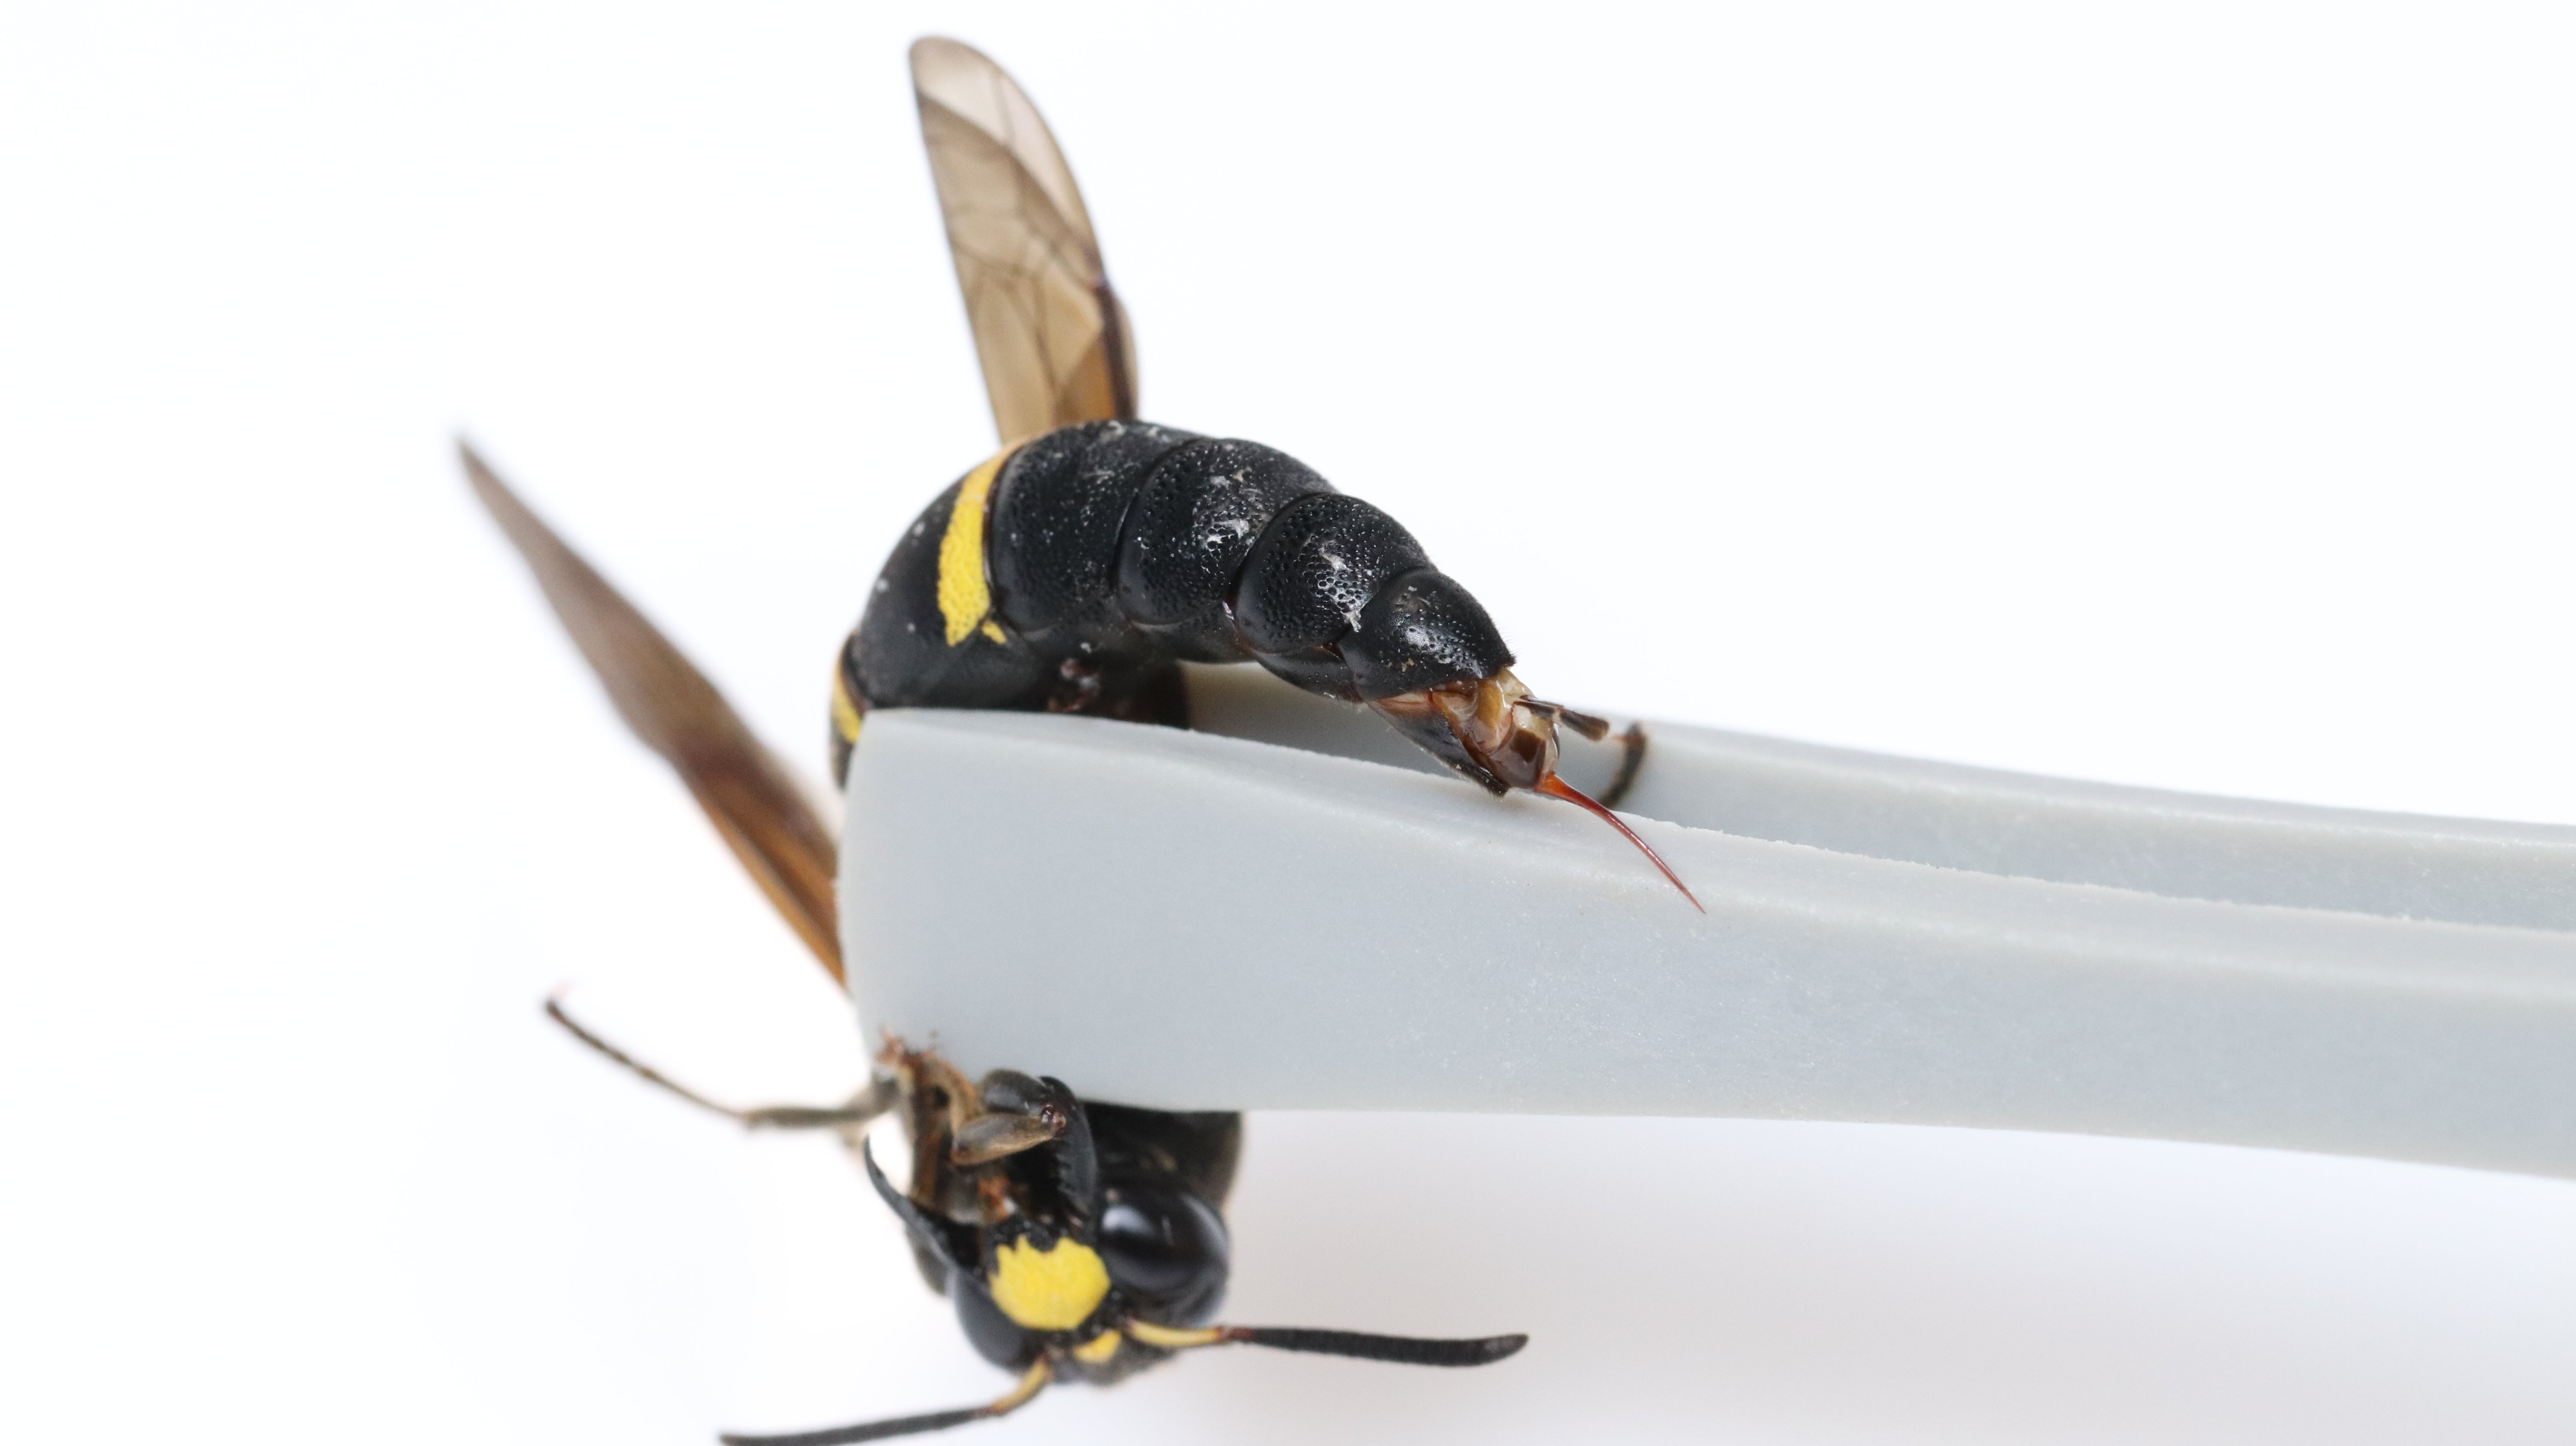 The sting of a female A. gibbifrons wasp.